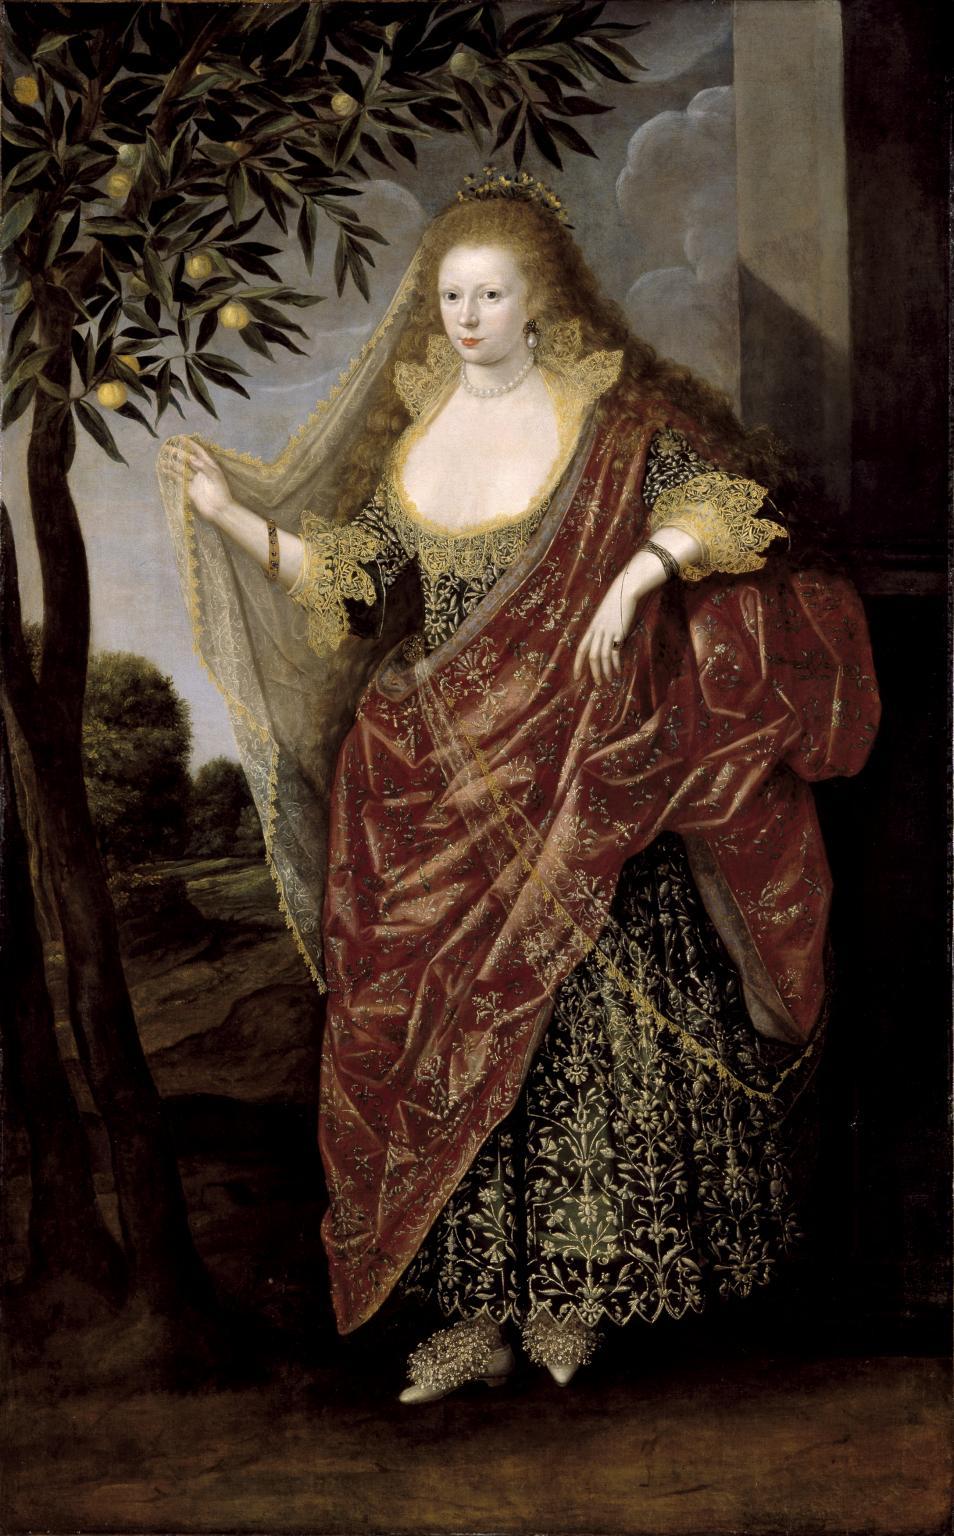 A woman in lavish clothes  in sulks and gold. She is standing next to an apple tree. She is reaching for an apple. Painting.